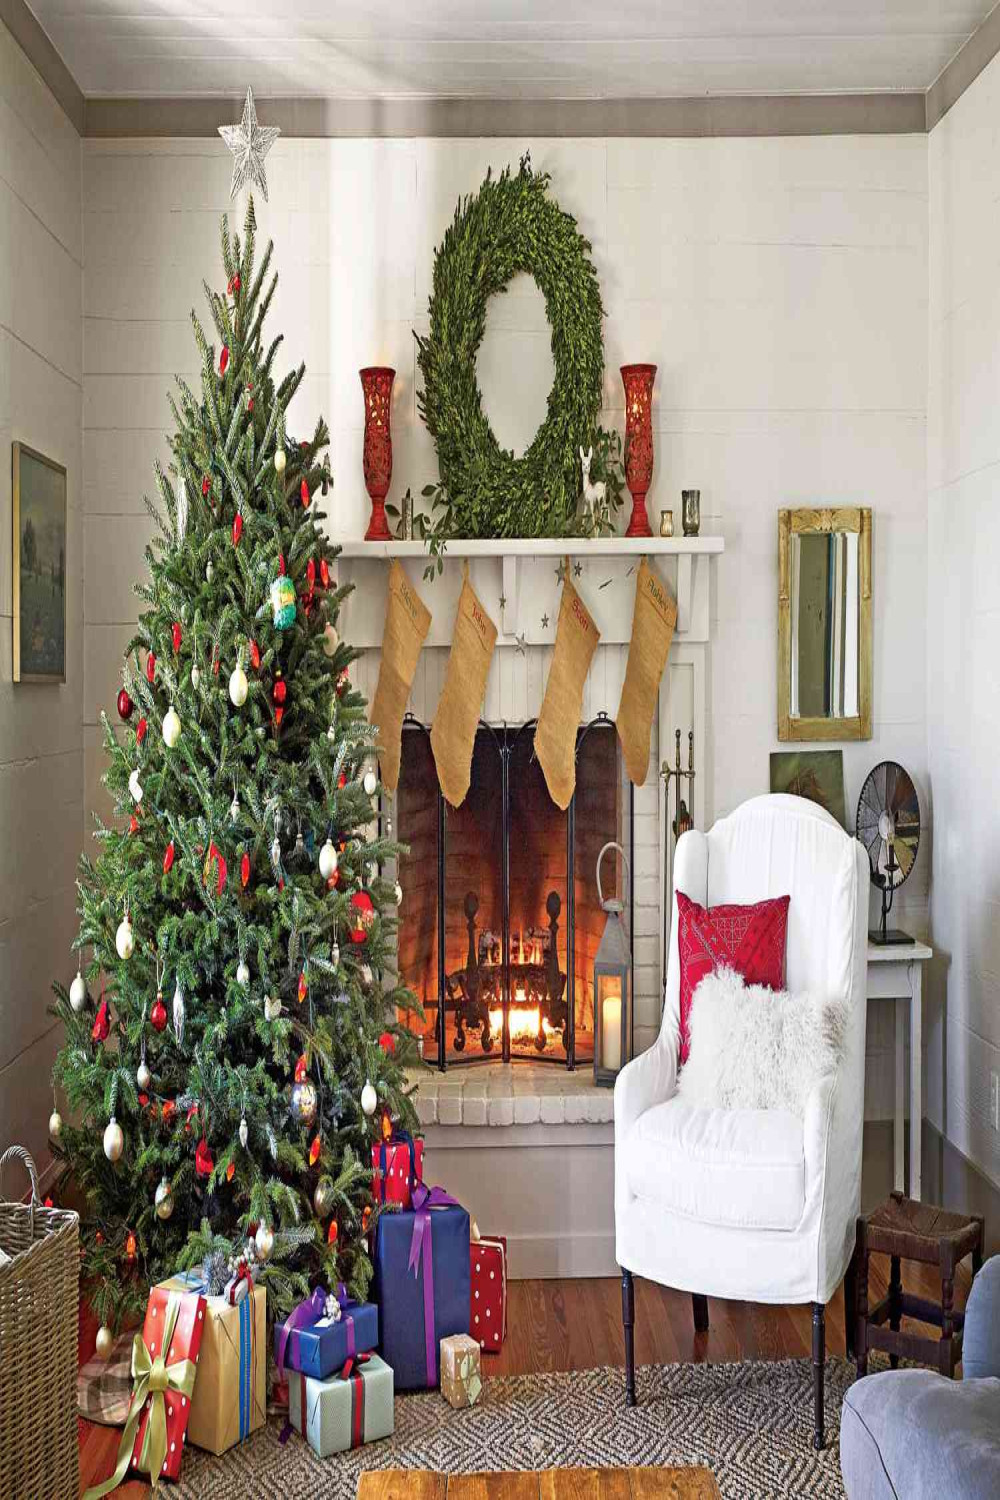 Our Favorite Living Room Decorating Ideas for Christmas